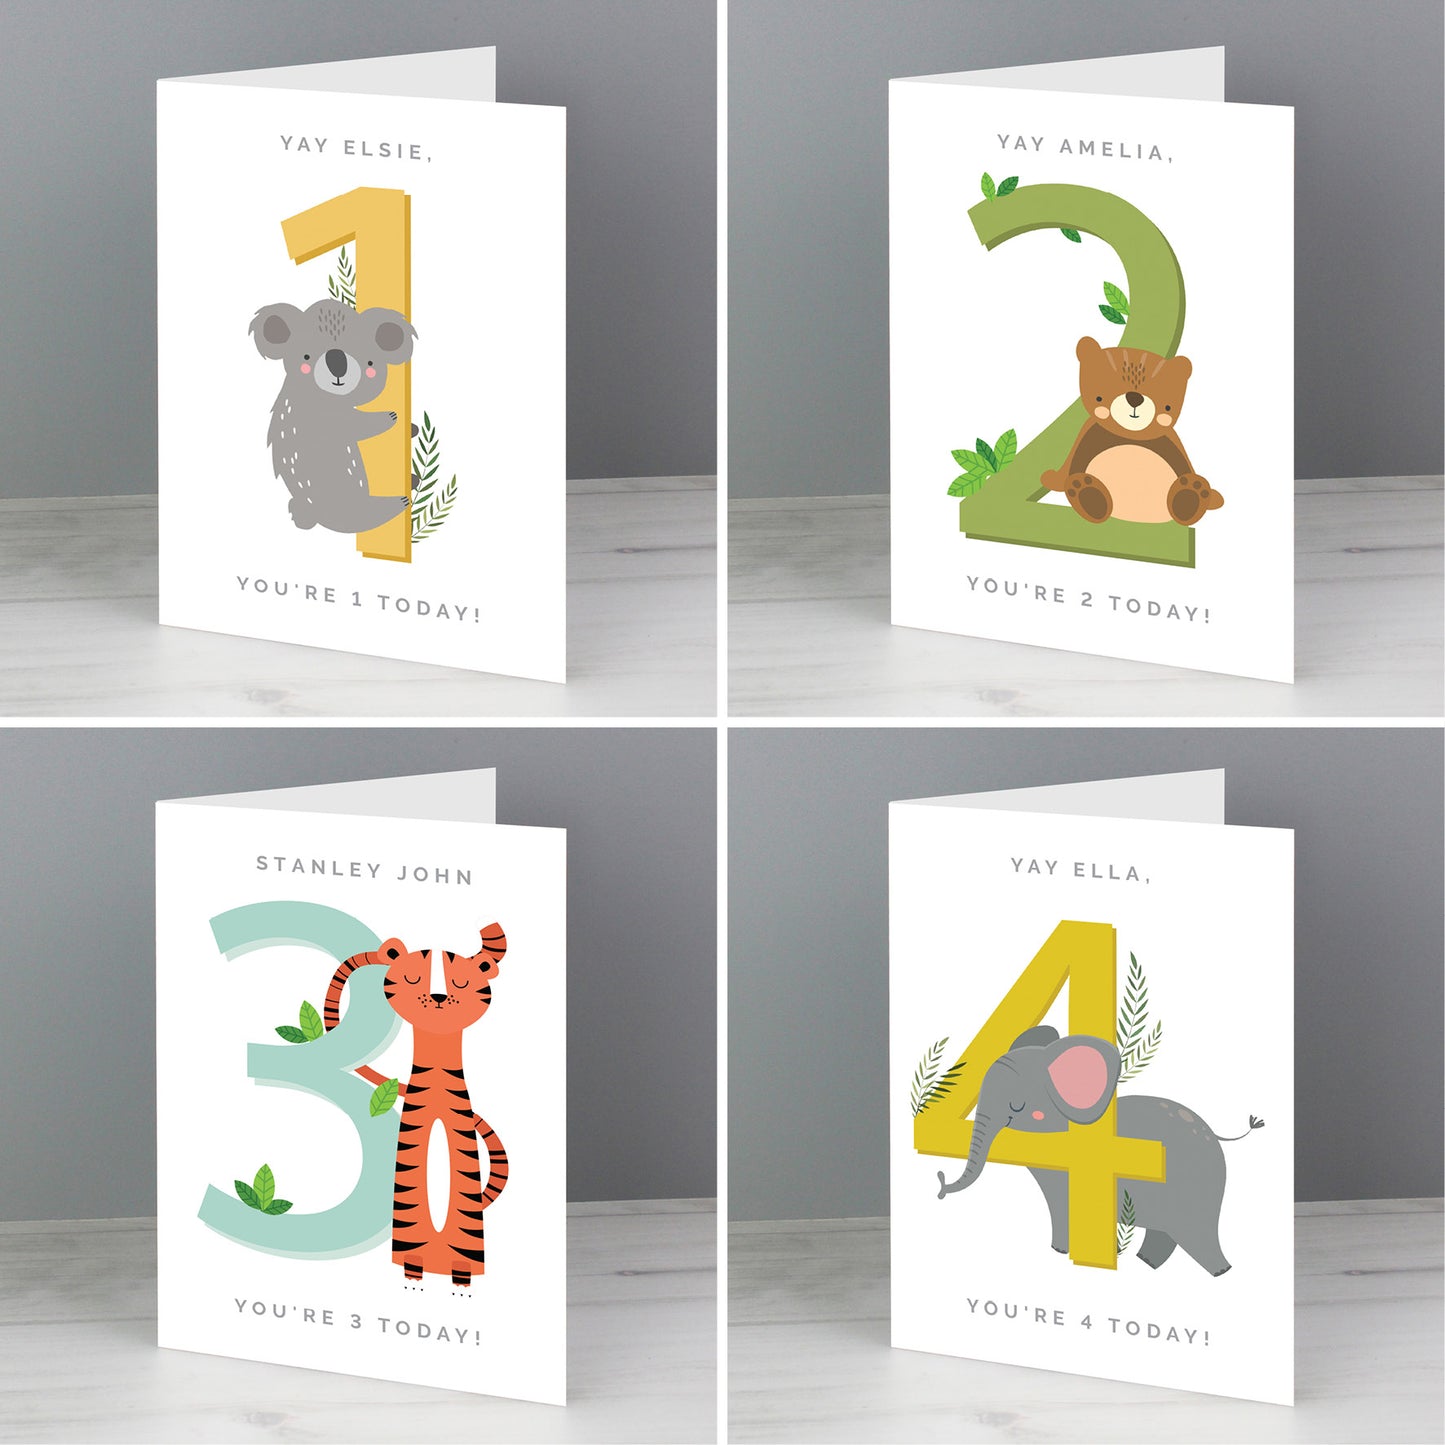 Personalised Animal Birthday Card Add Any Age & Name - Personalise It!